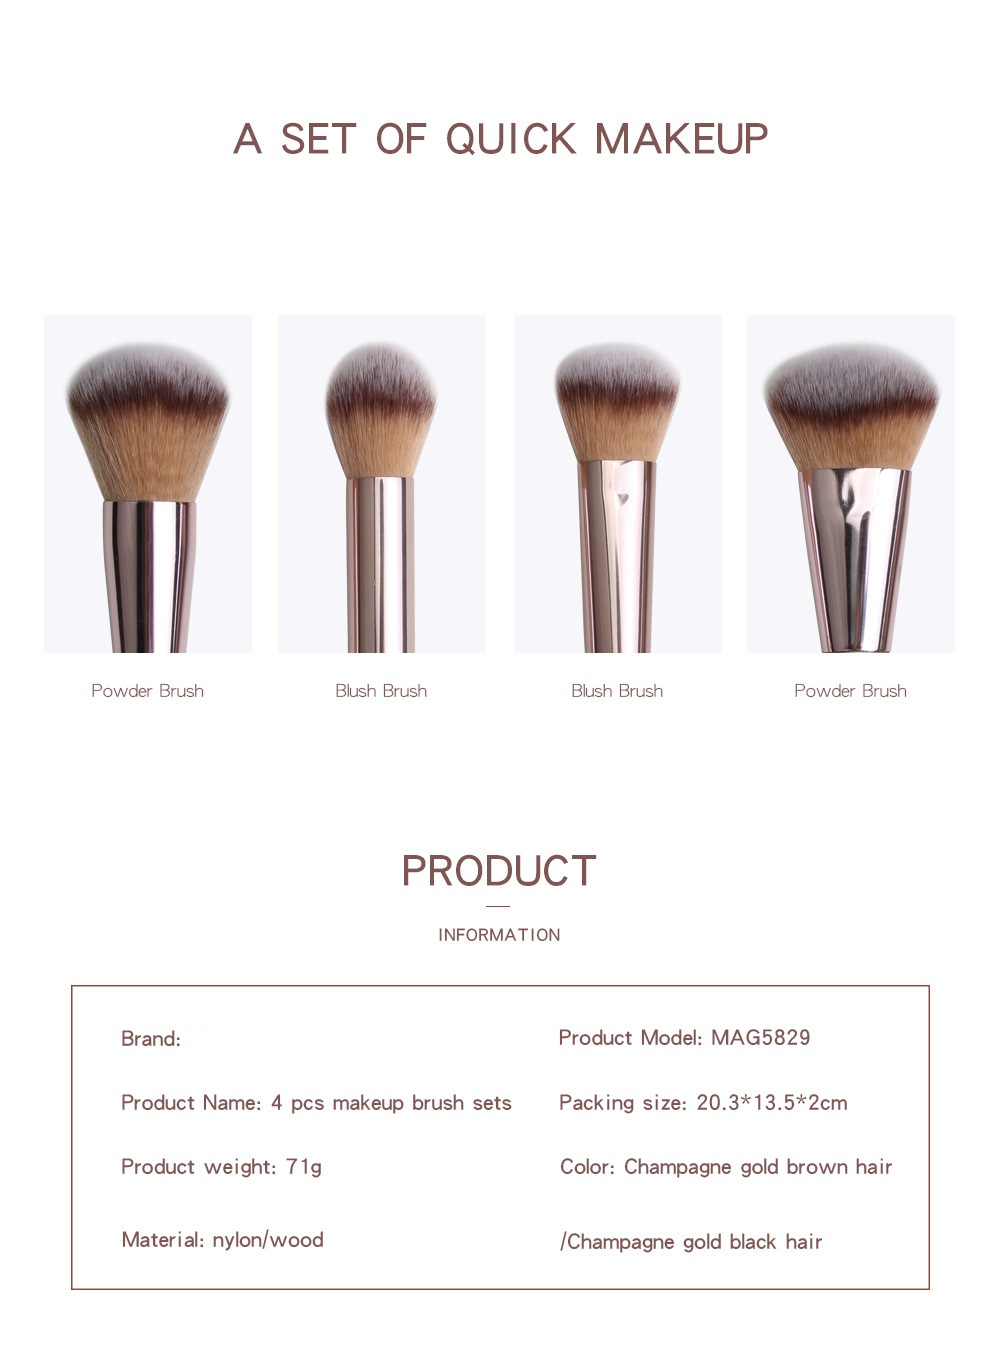 4 Piece Champagne Gold Makeup Brushes set name